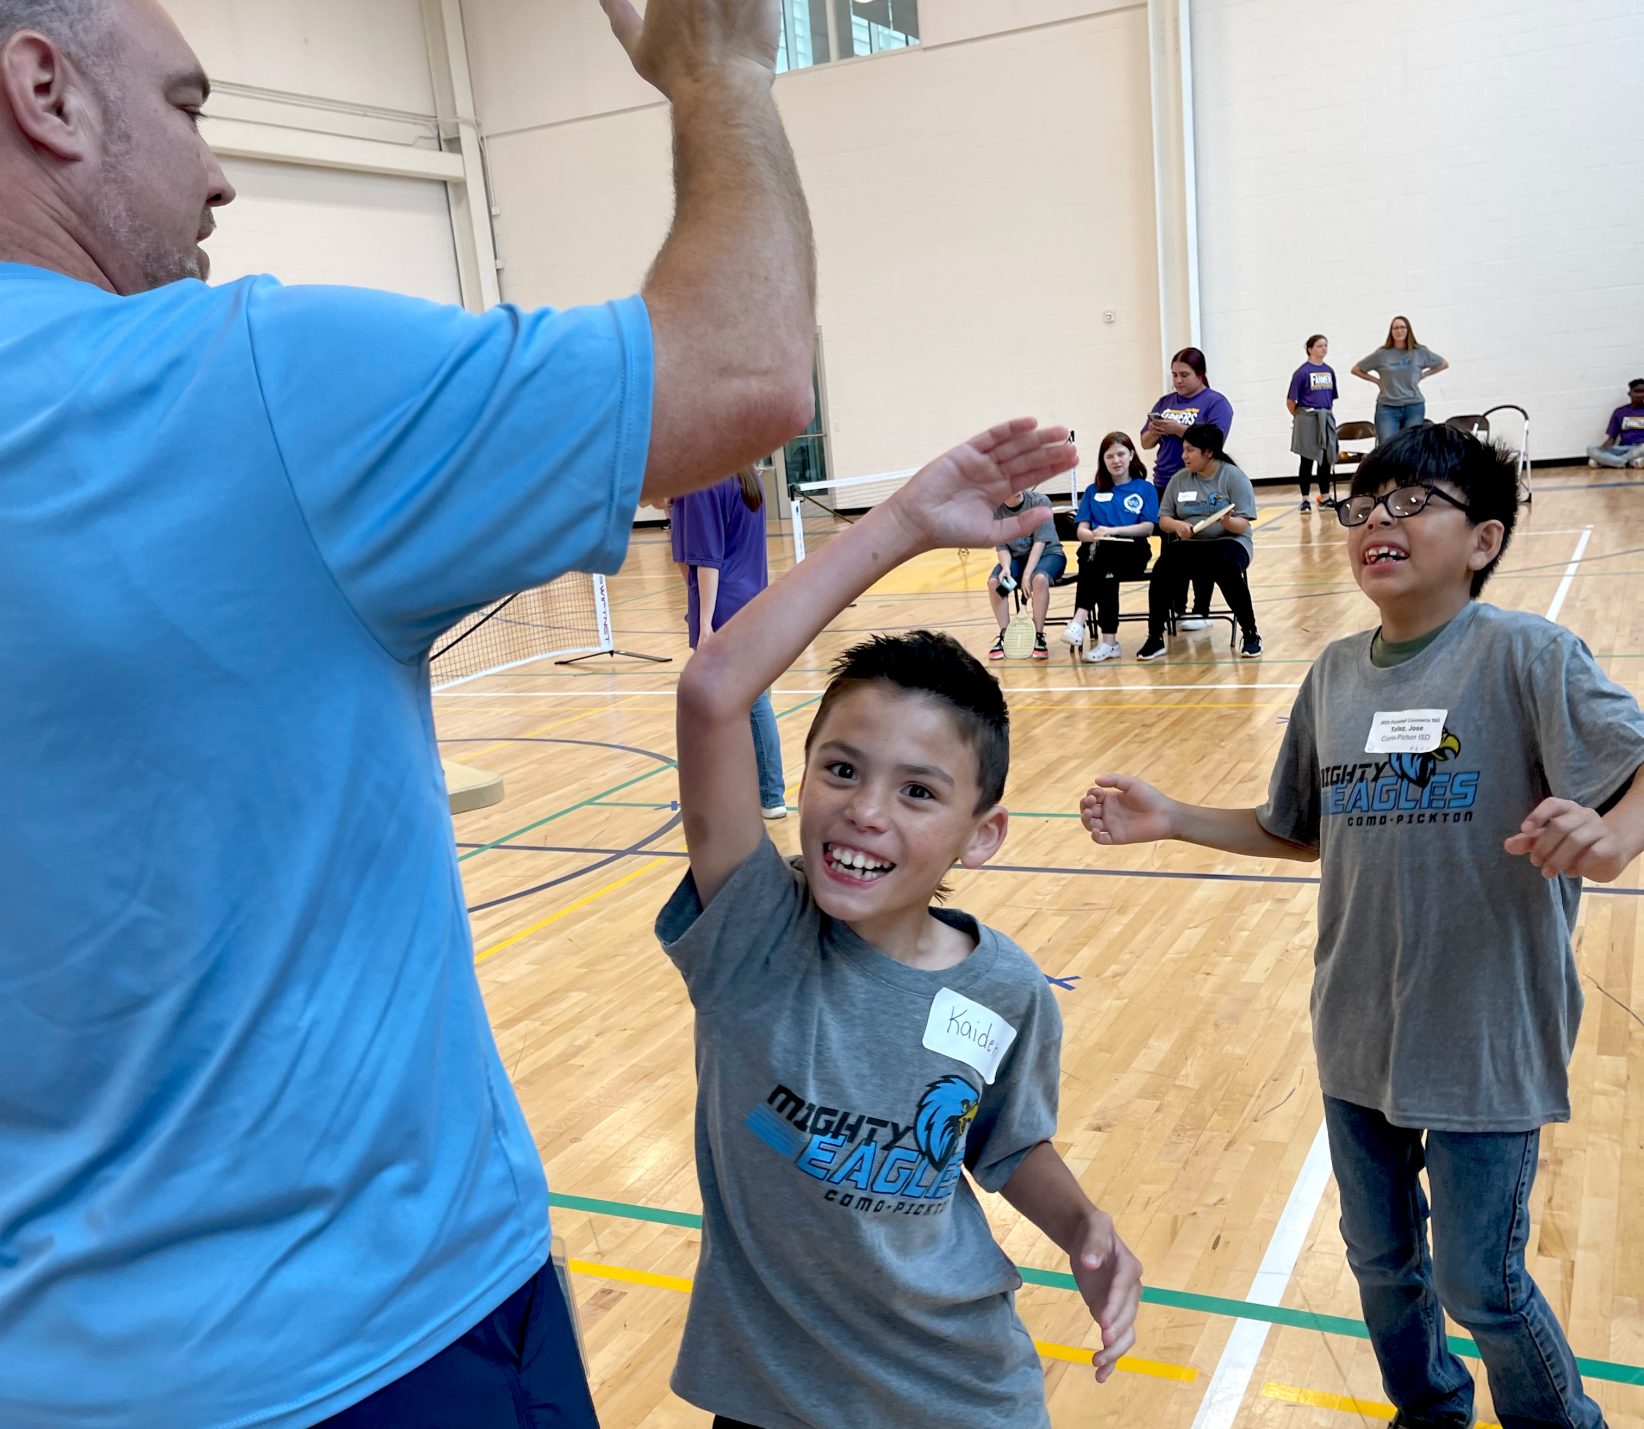 Two Special Olympics athletes celebrate while one athlete high-fives an attendee.